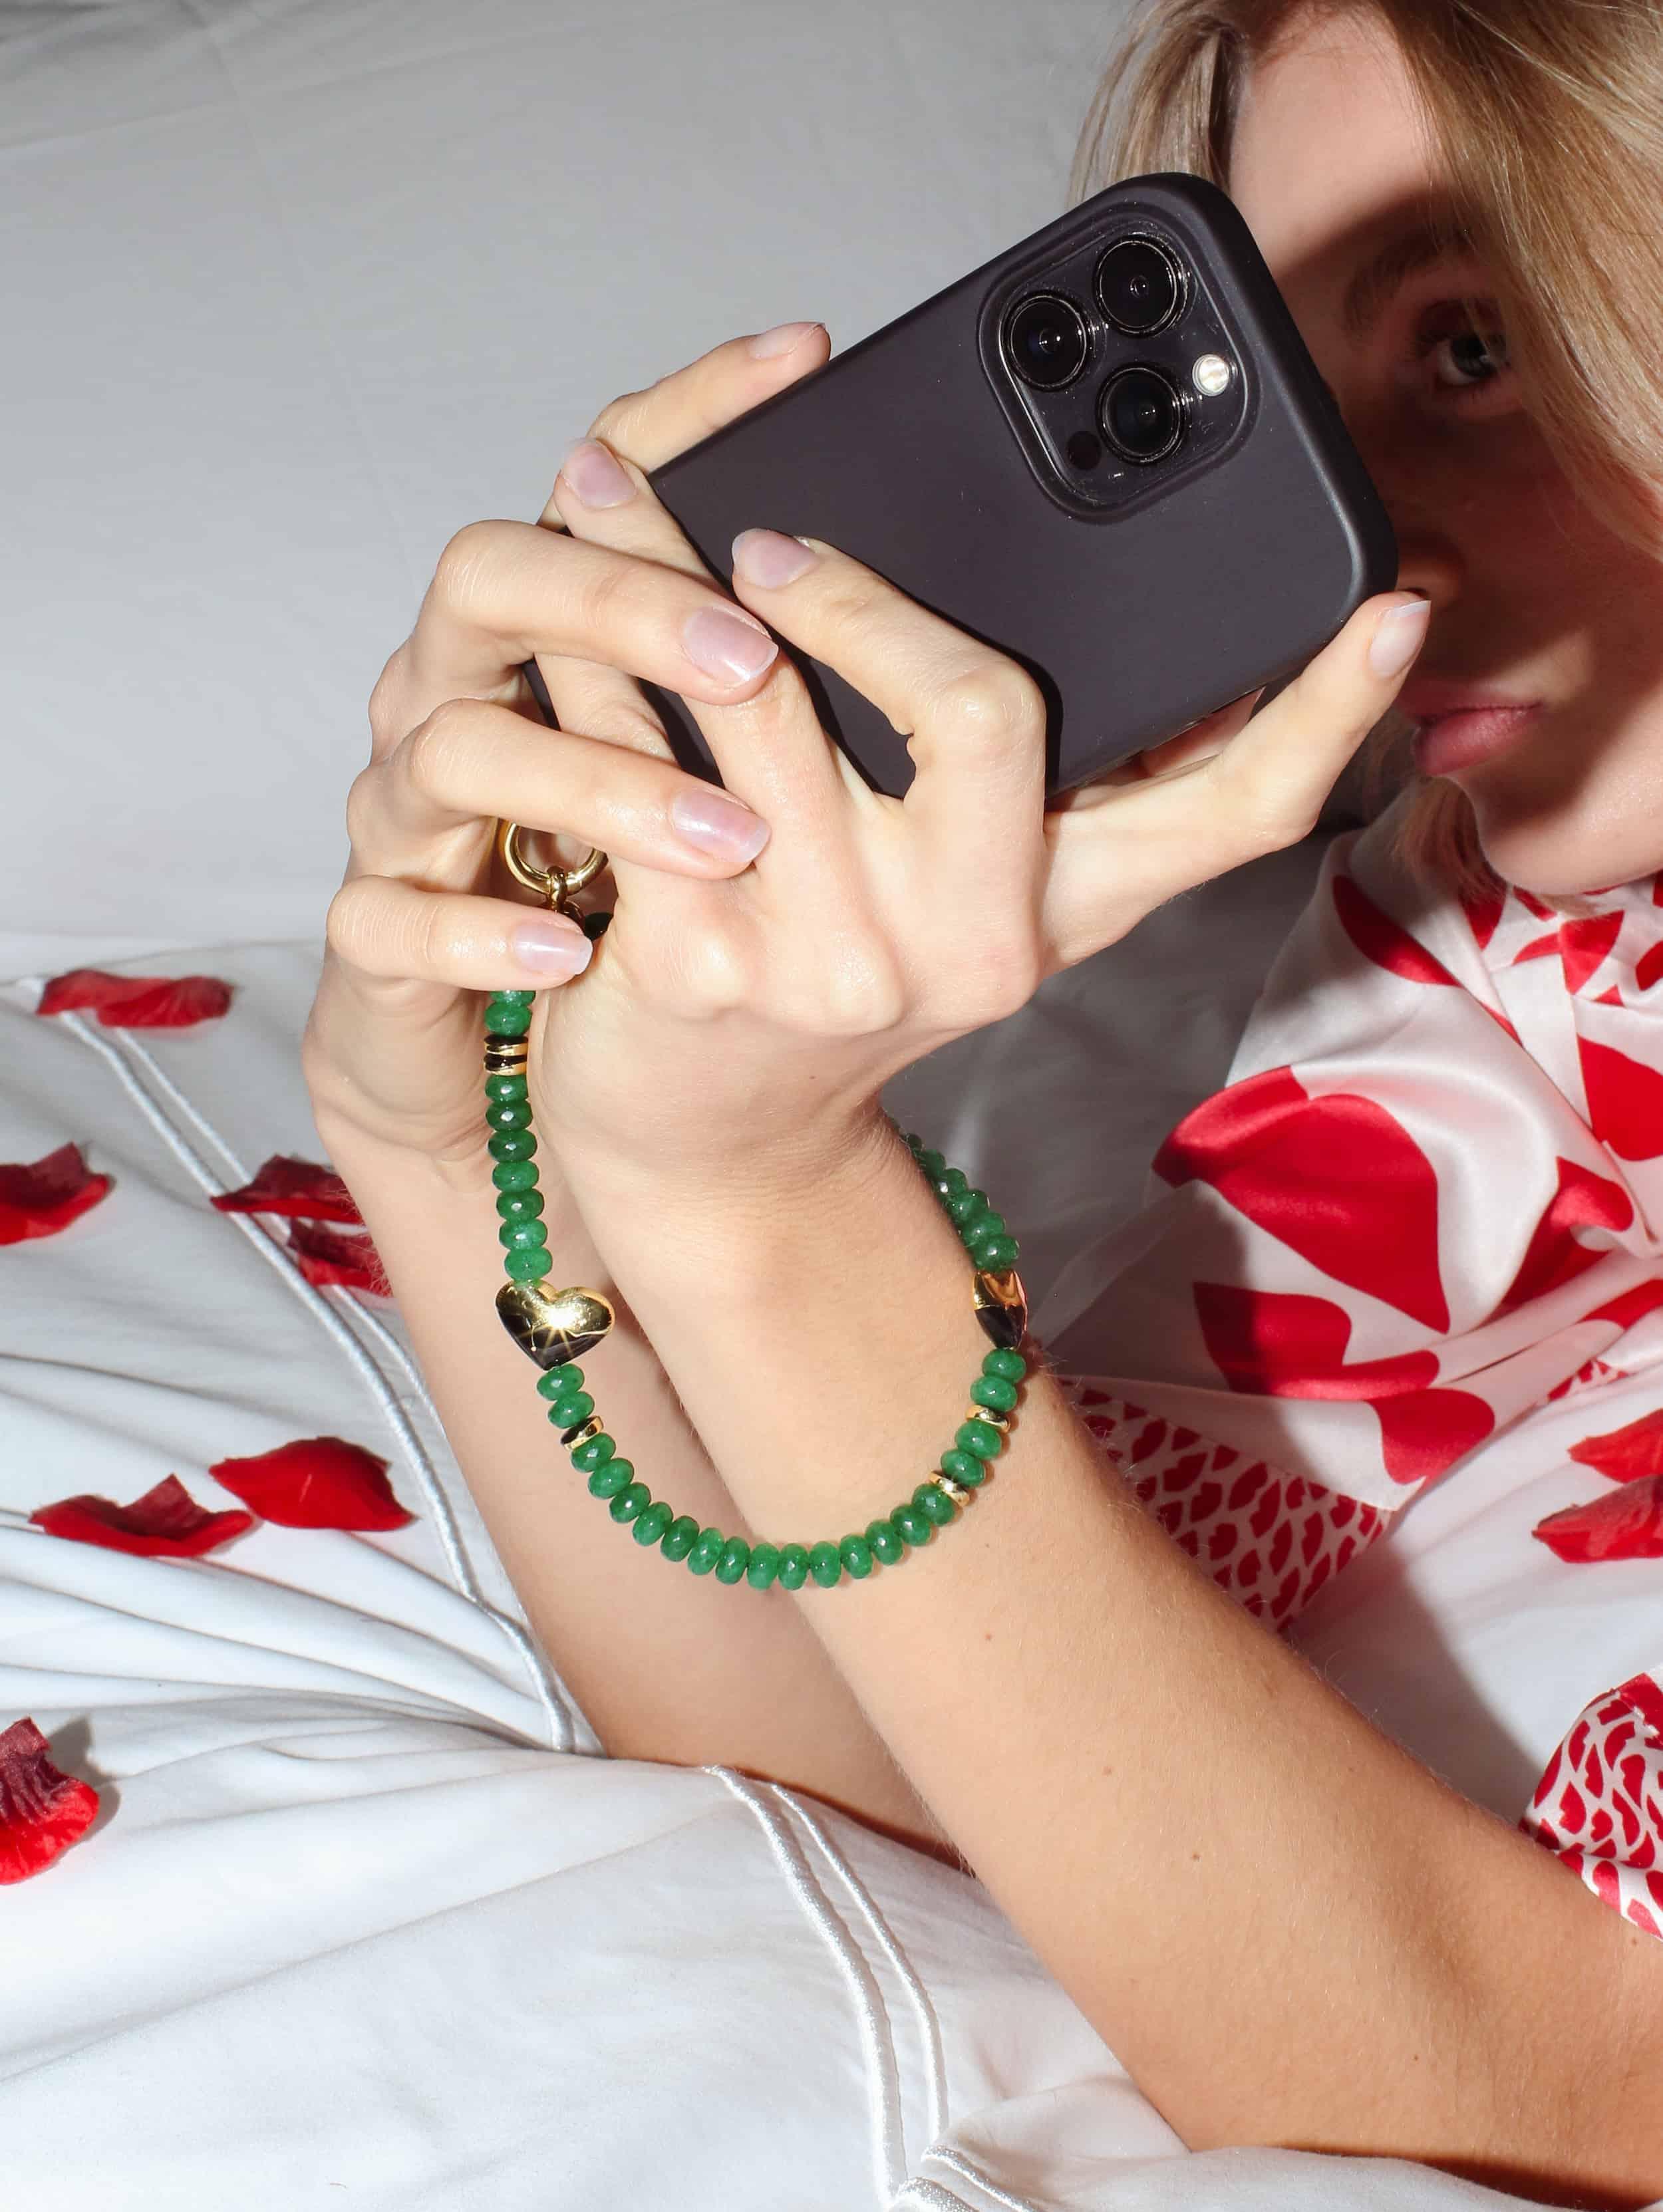 an emerald green wristlet phone strap around the wrist of a woman taking a selfie